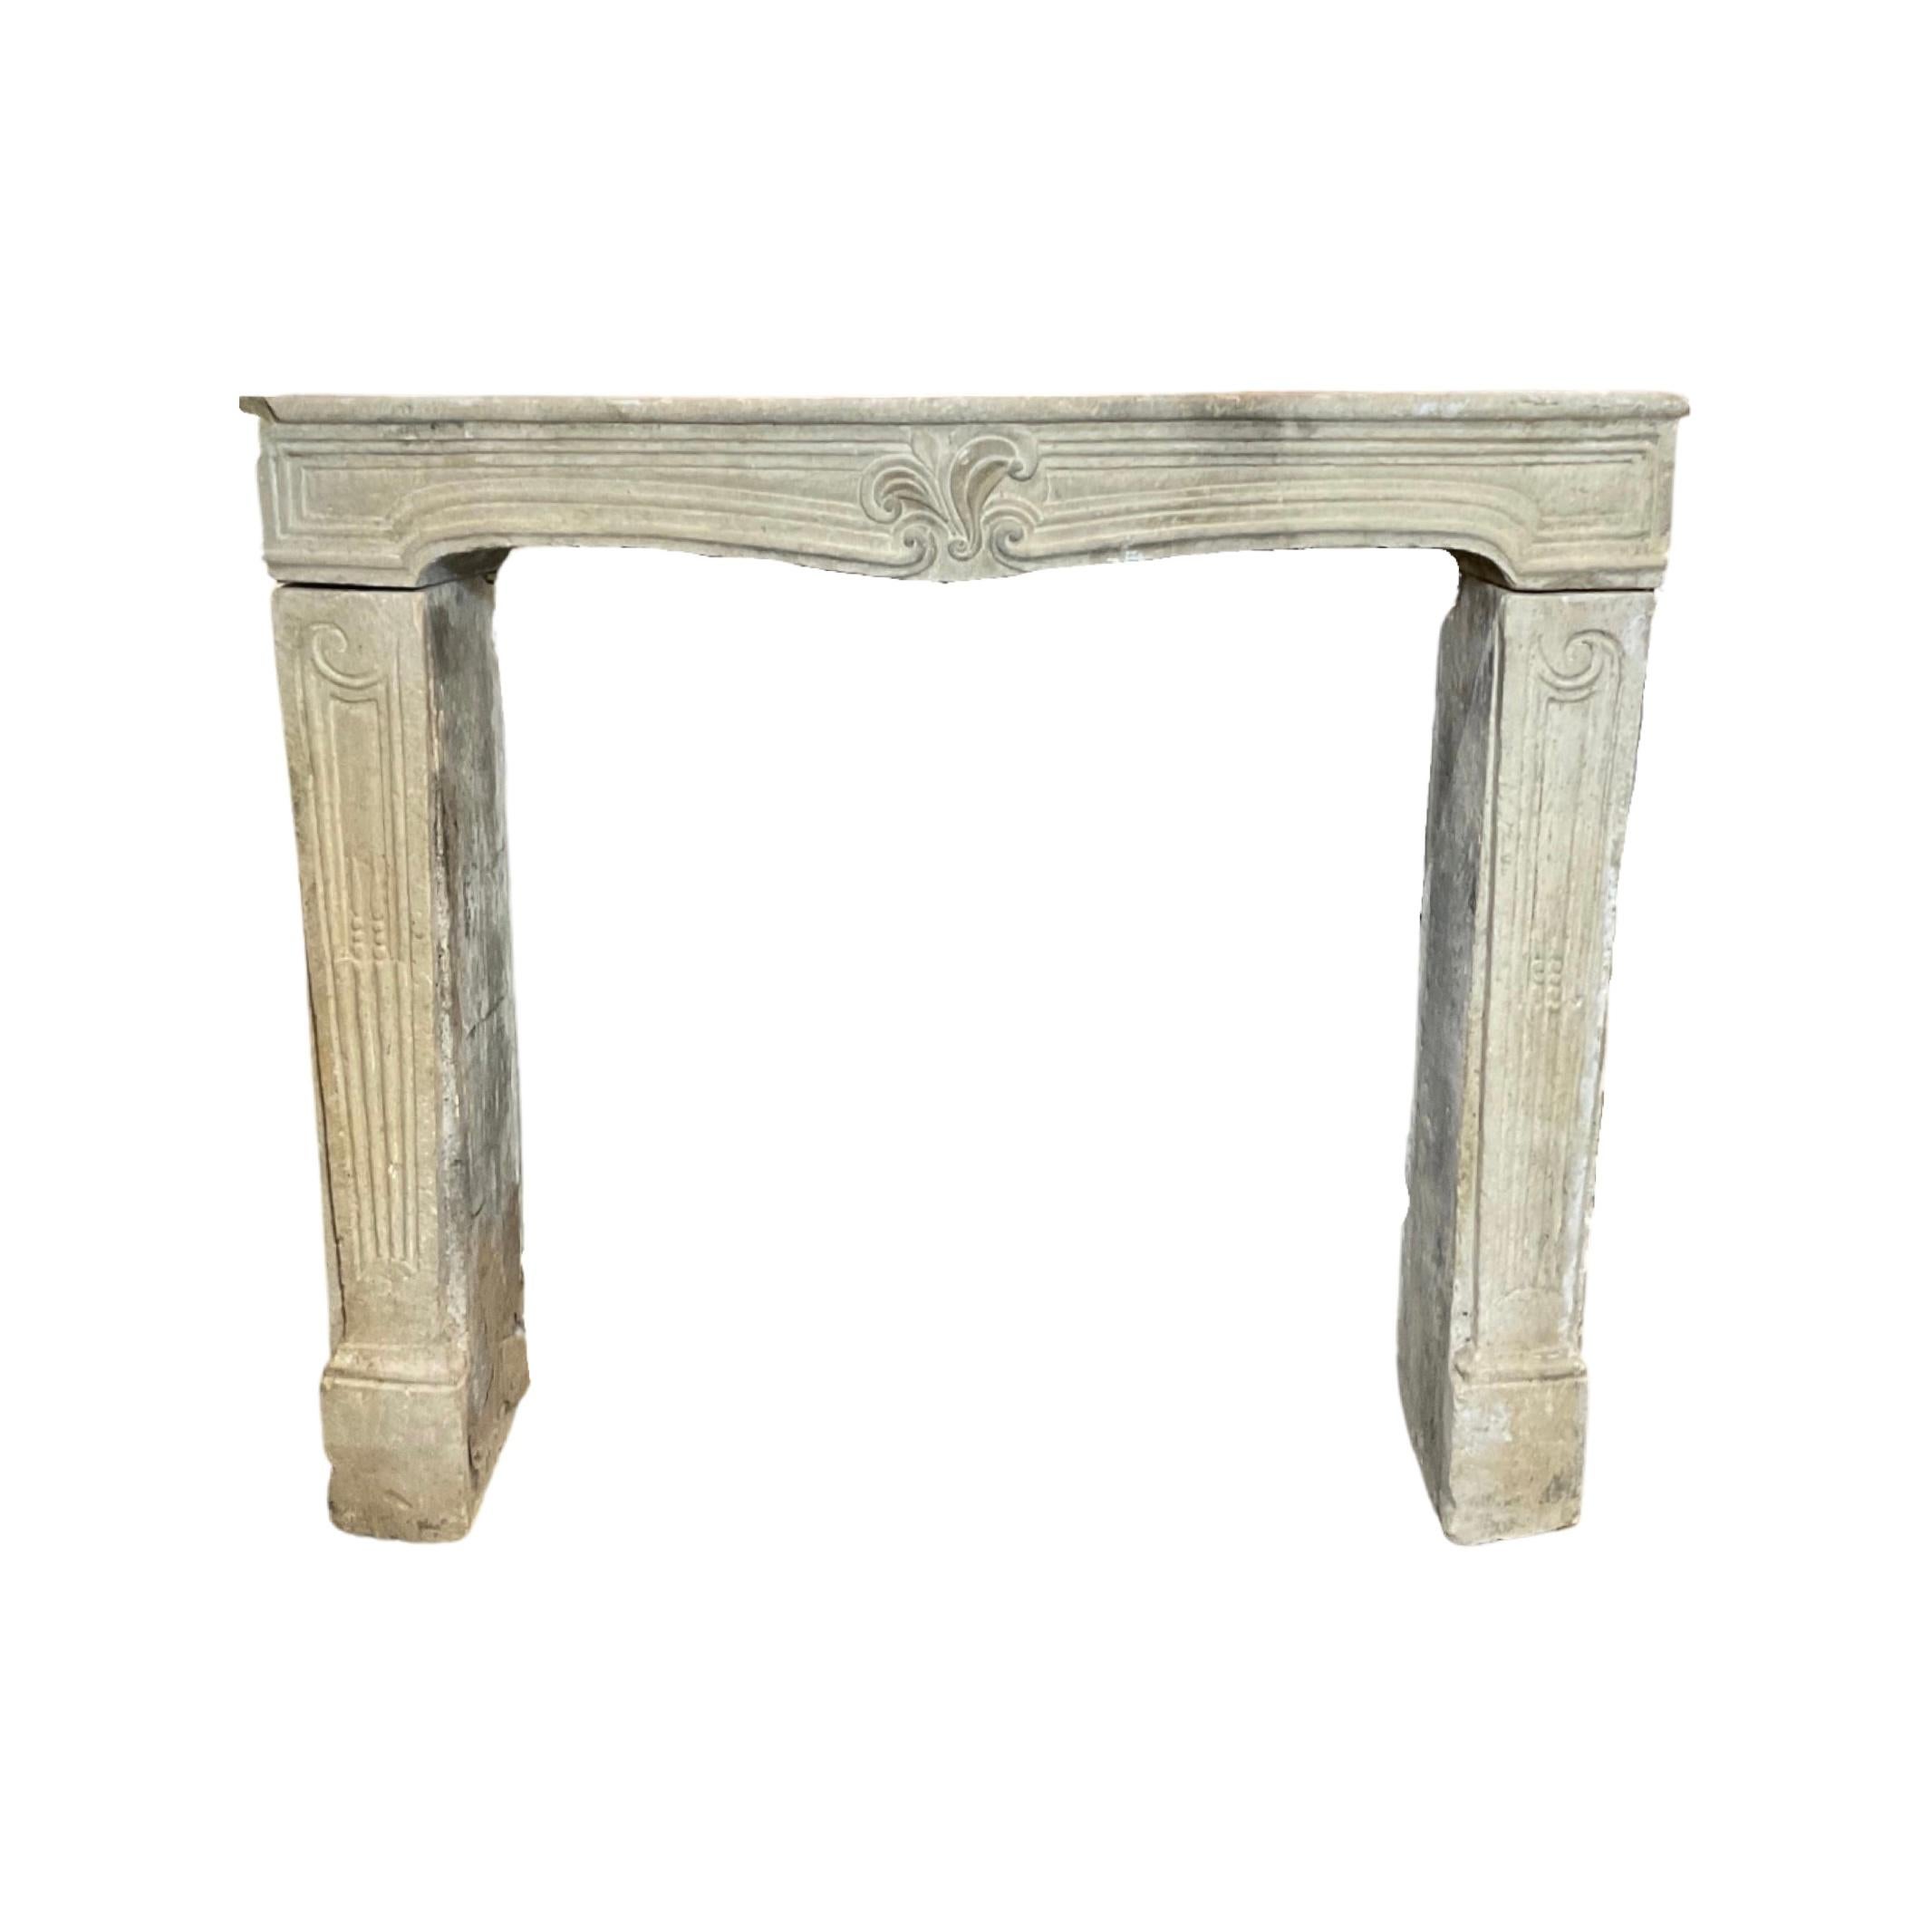 This French limestone mantel, crafted in the Louis XVI style circa 1820, is a stunning example of the elegance and sophistication of French design. The intricately carved details and gentle curves of the mantel reflect the refined tastes of the era,